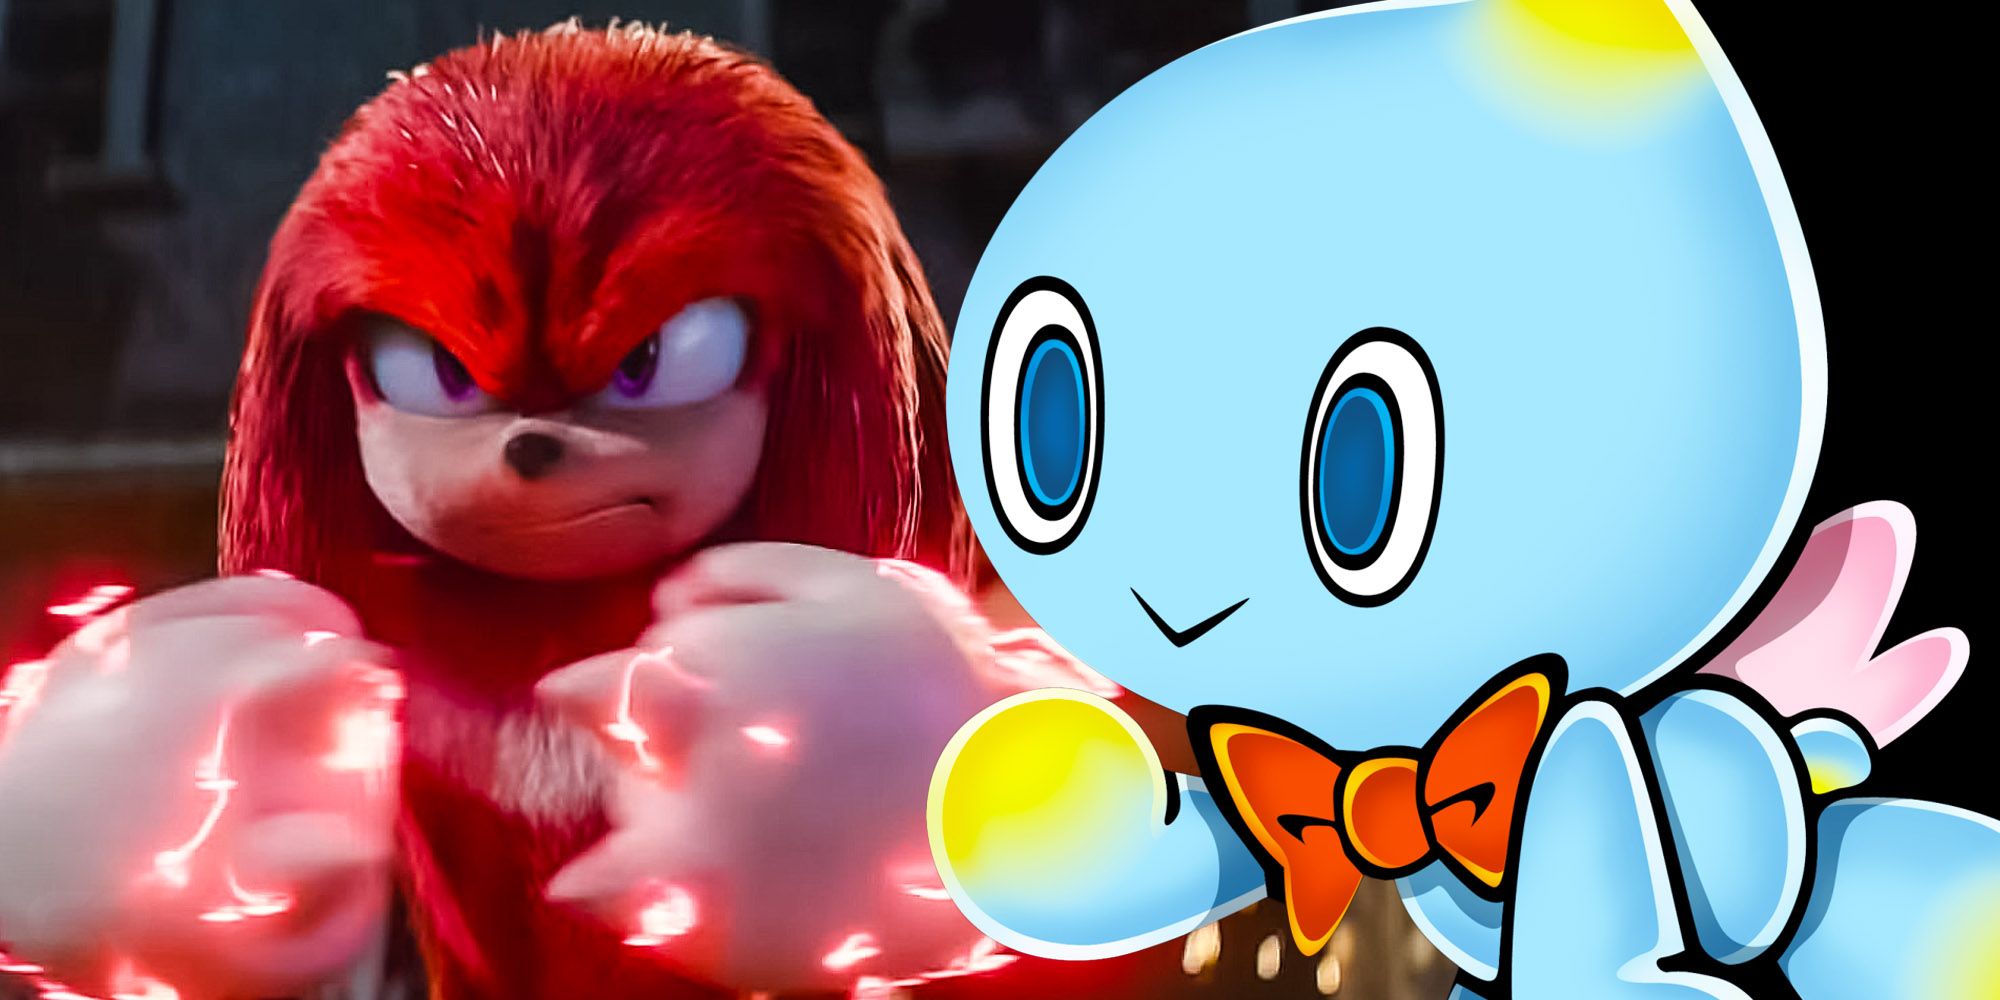 Sonic the hedgehog 2 knuckles sets up the Chaos introduction